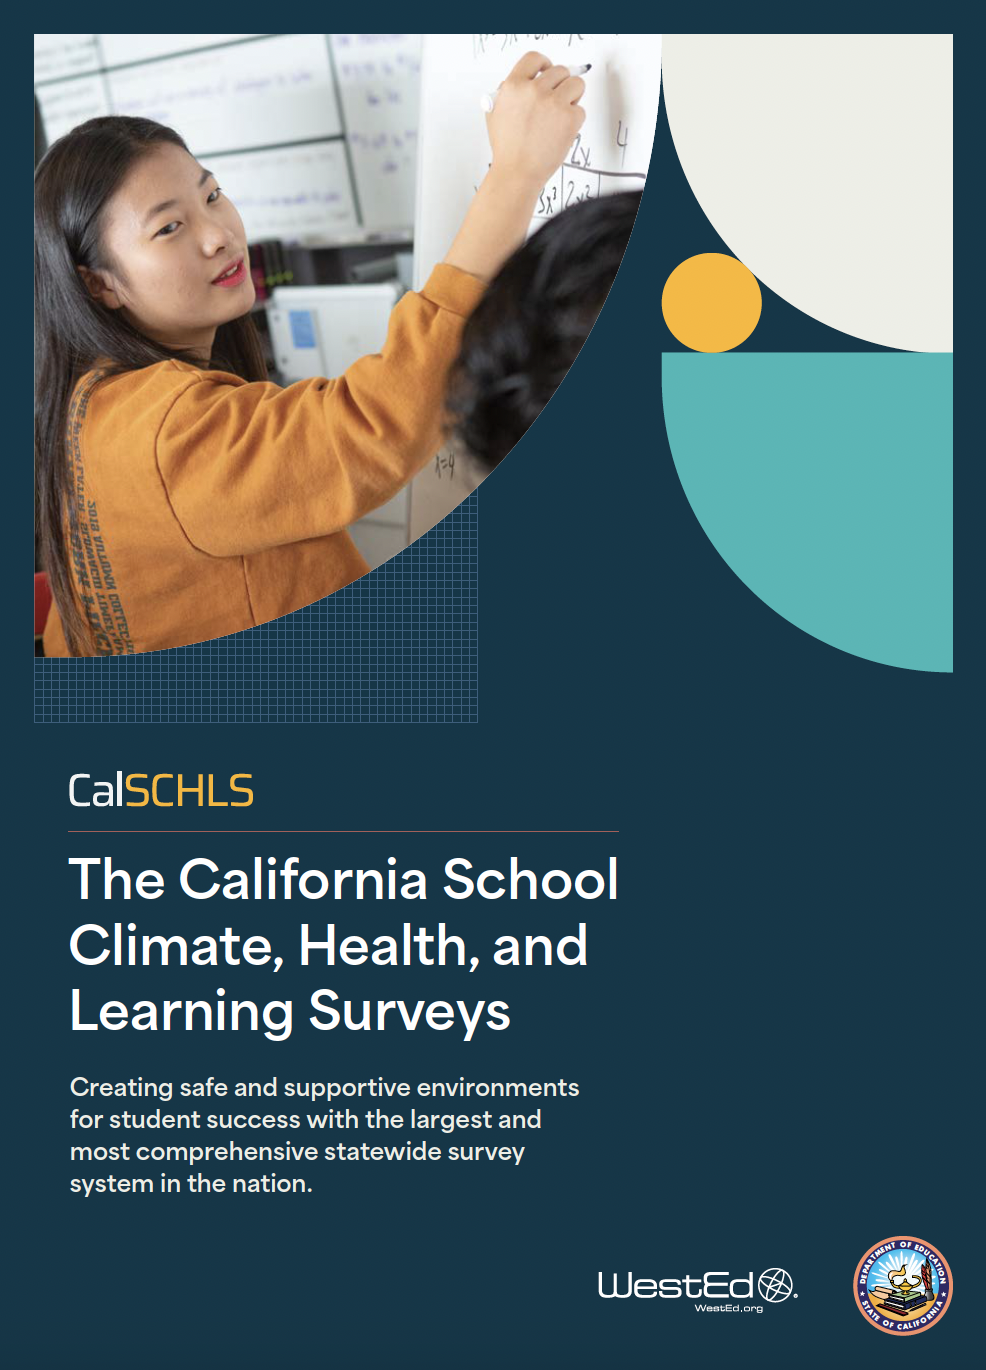 The California School Climate, Health, and Learning Surveys